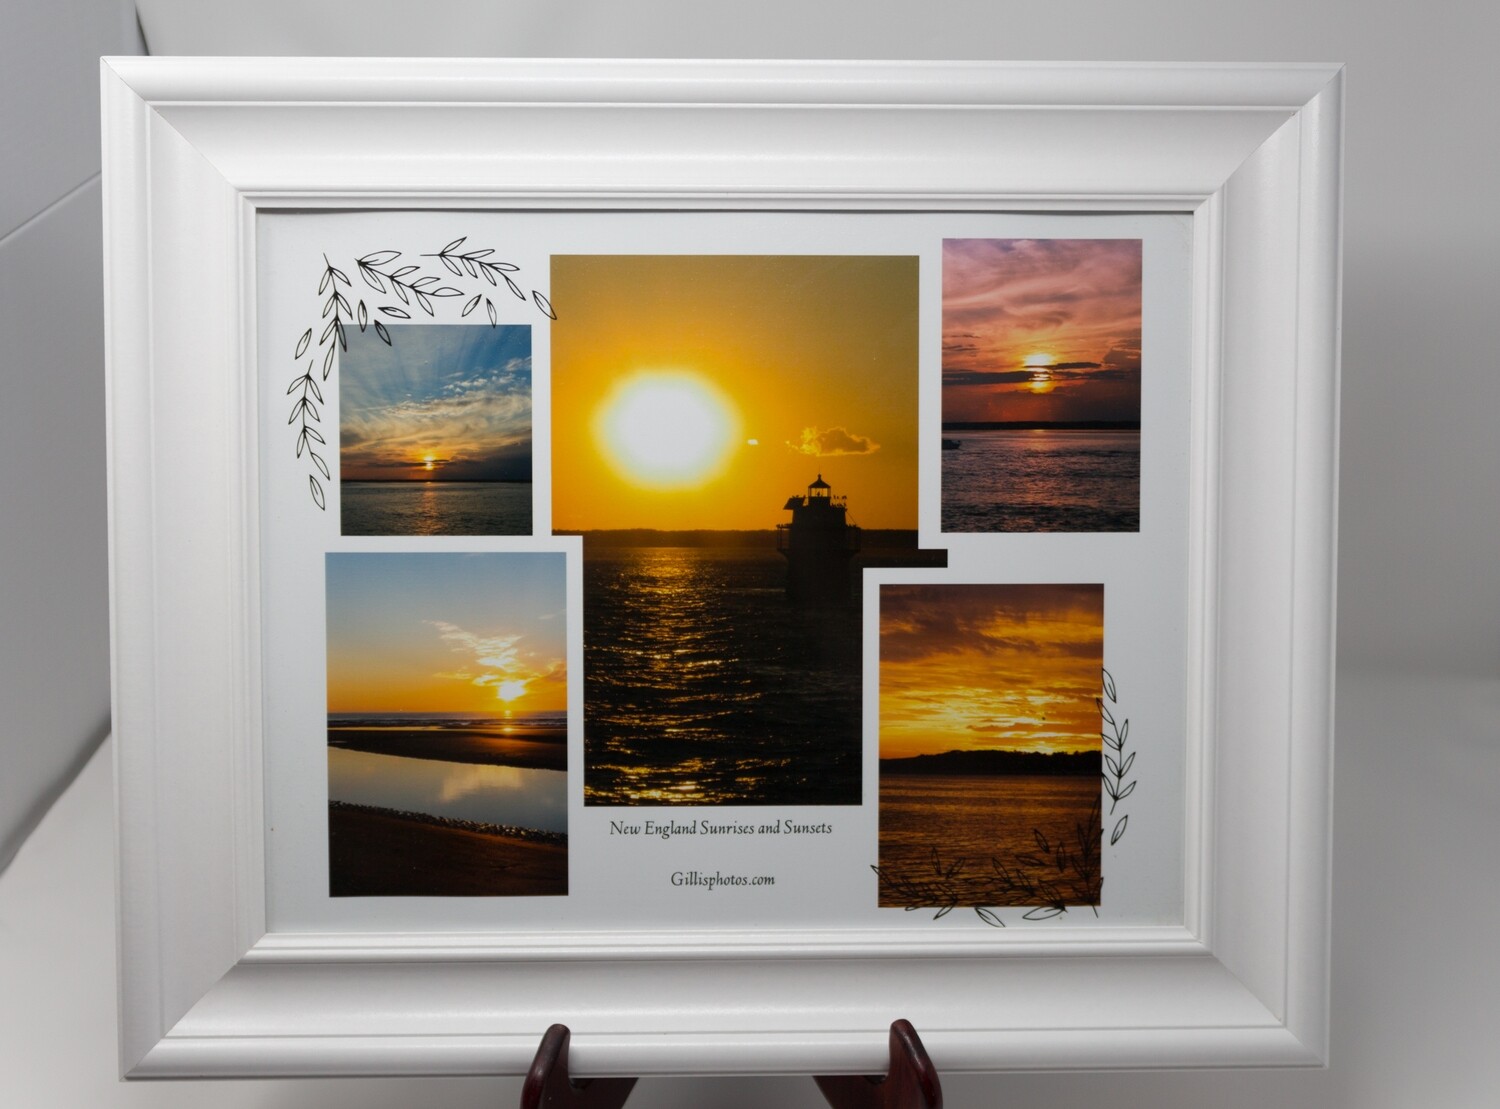 ​11"x14" Framed Collage-Sunrises and Sunsets from around New England​